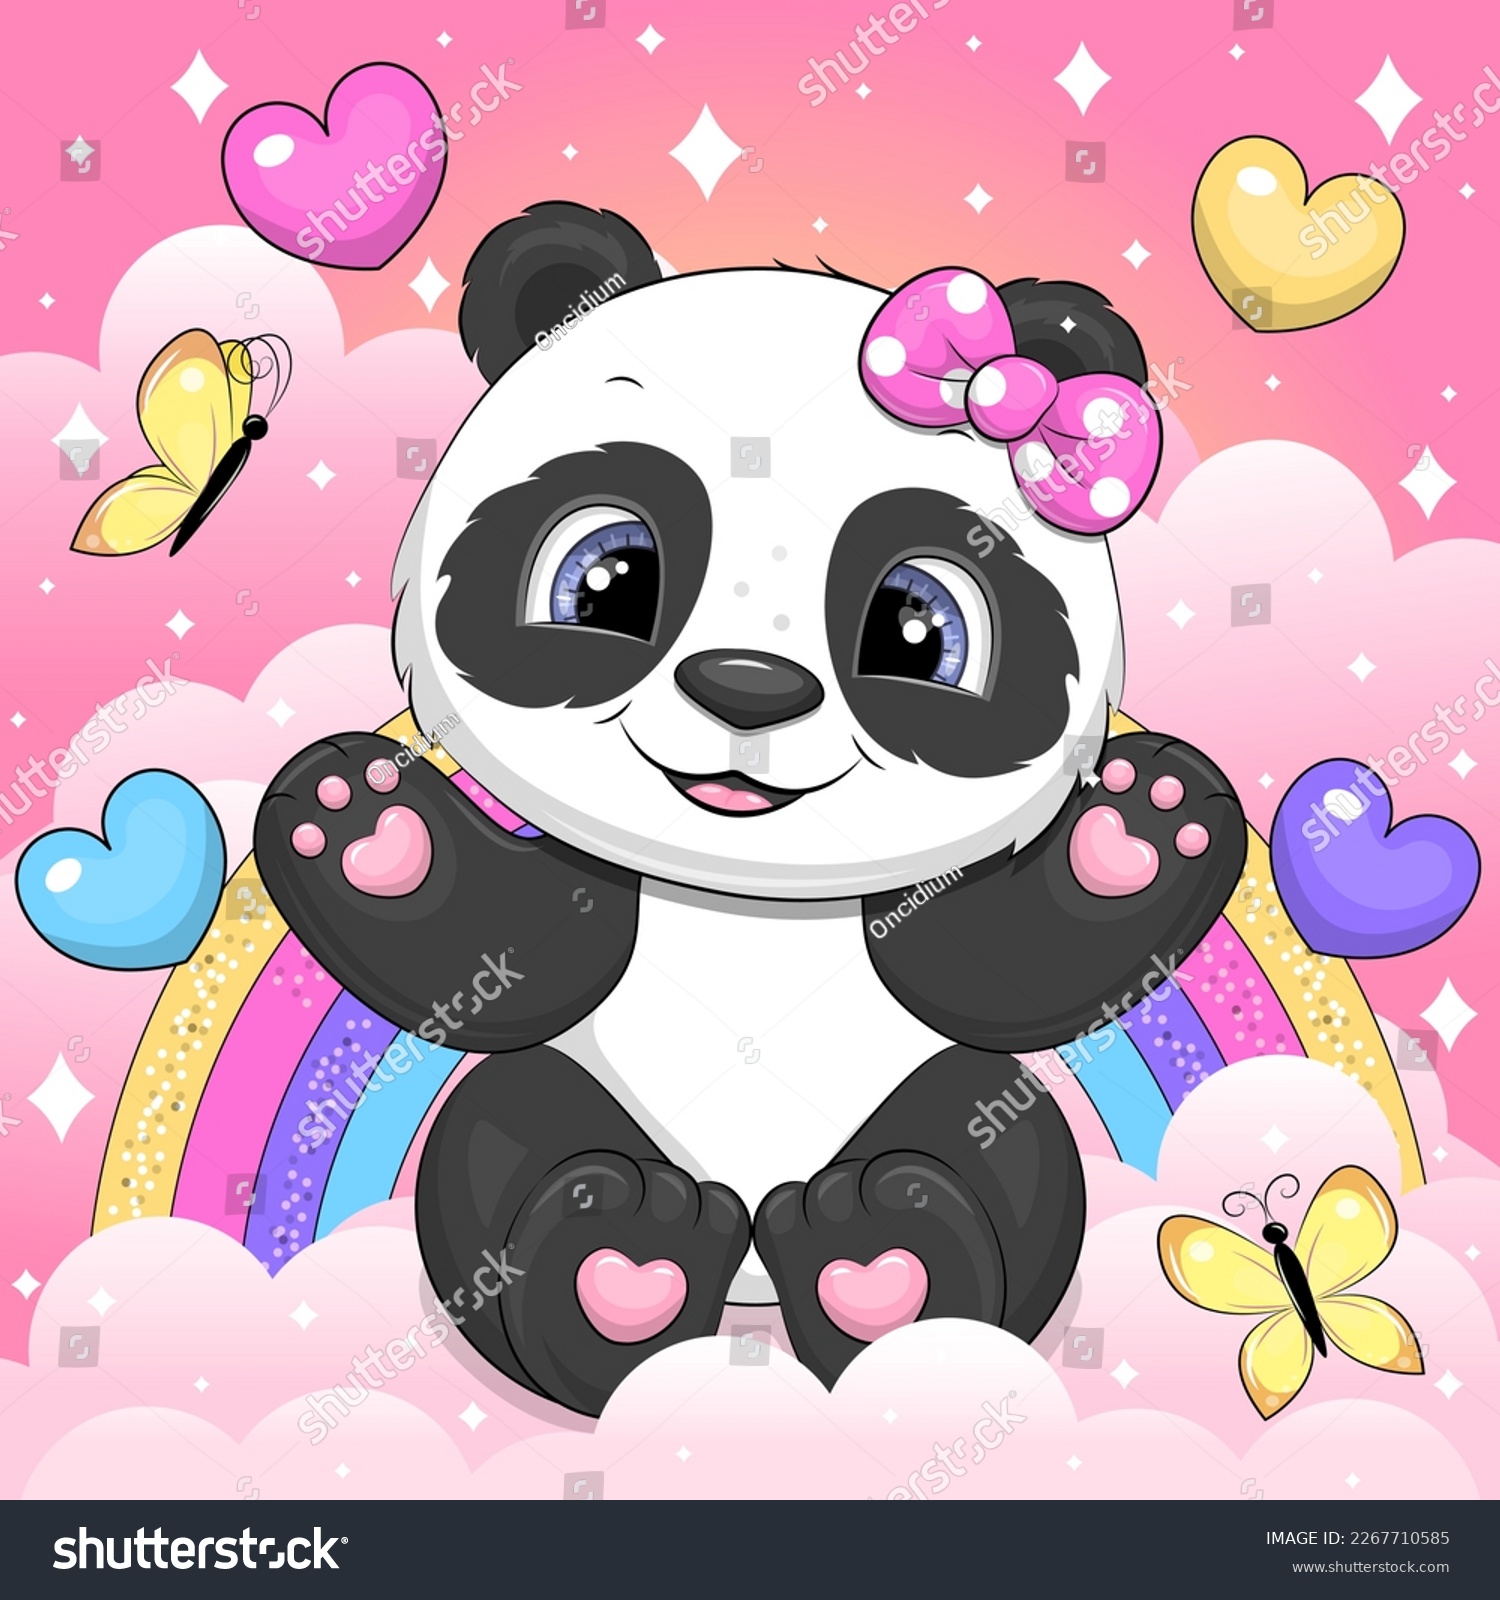 SVG of A cute cartoon panda sits on a pink cloud. Vector illustration of an animal on a pink background with clouds, hearts, butterflies and a rainbow. svg